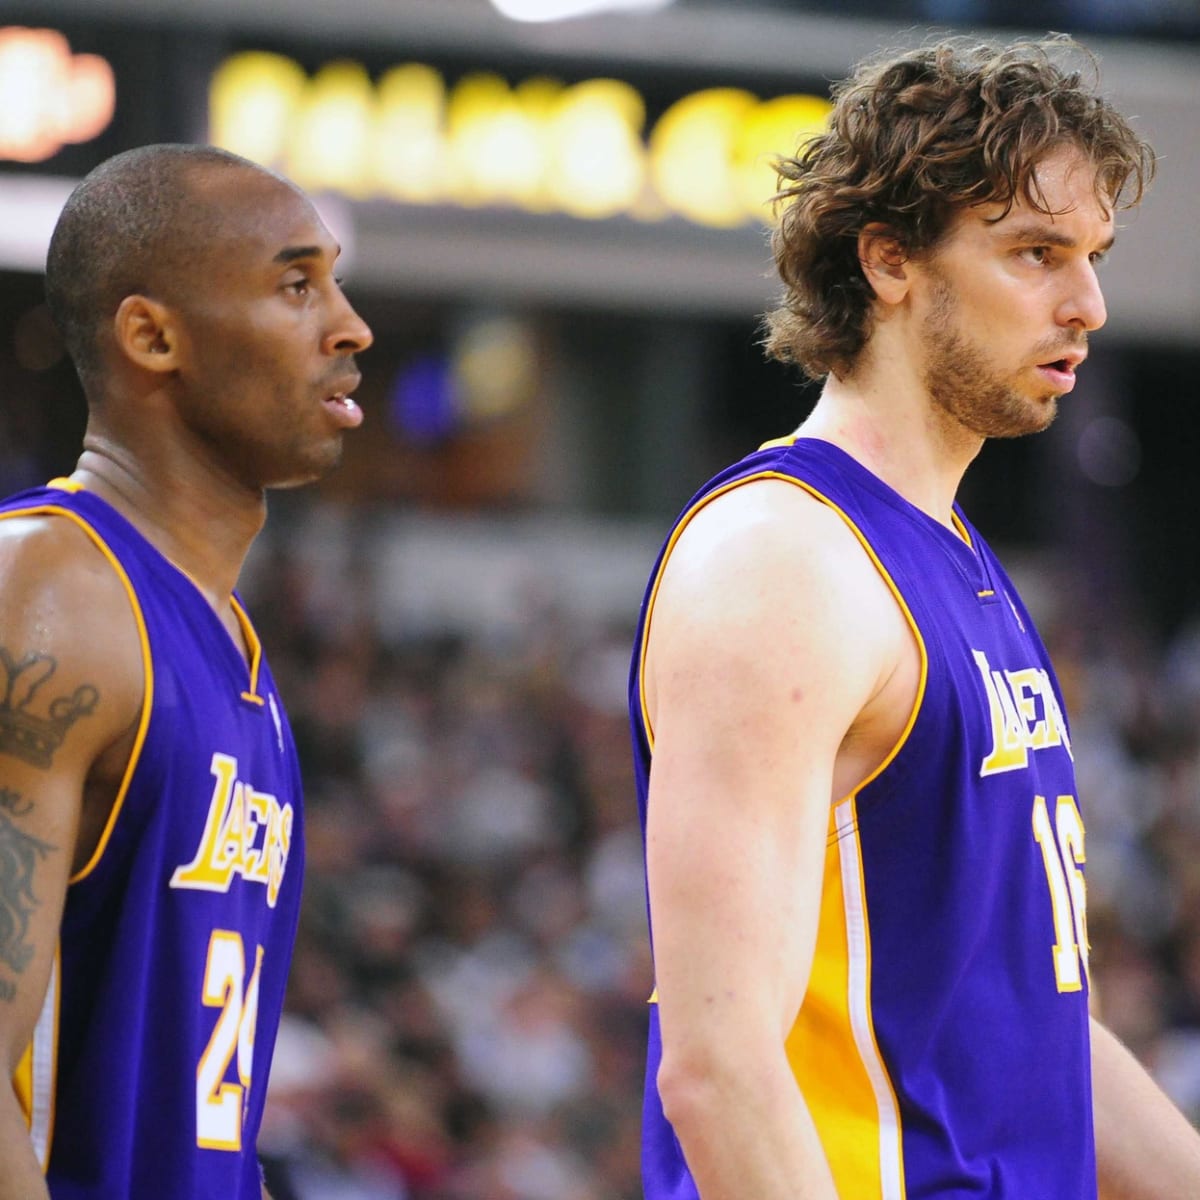 The close relationship between Vanessa Bryant and Pau Gasol